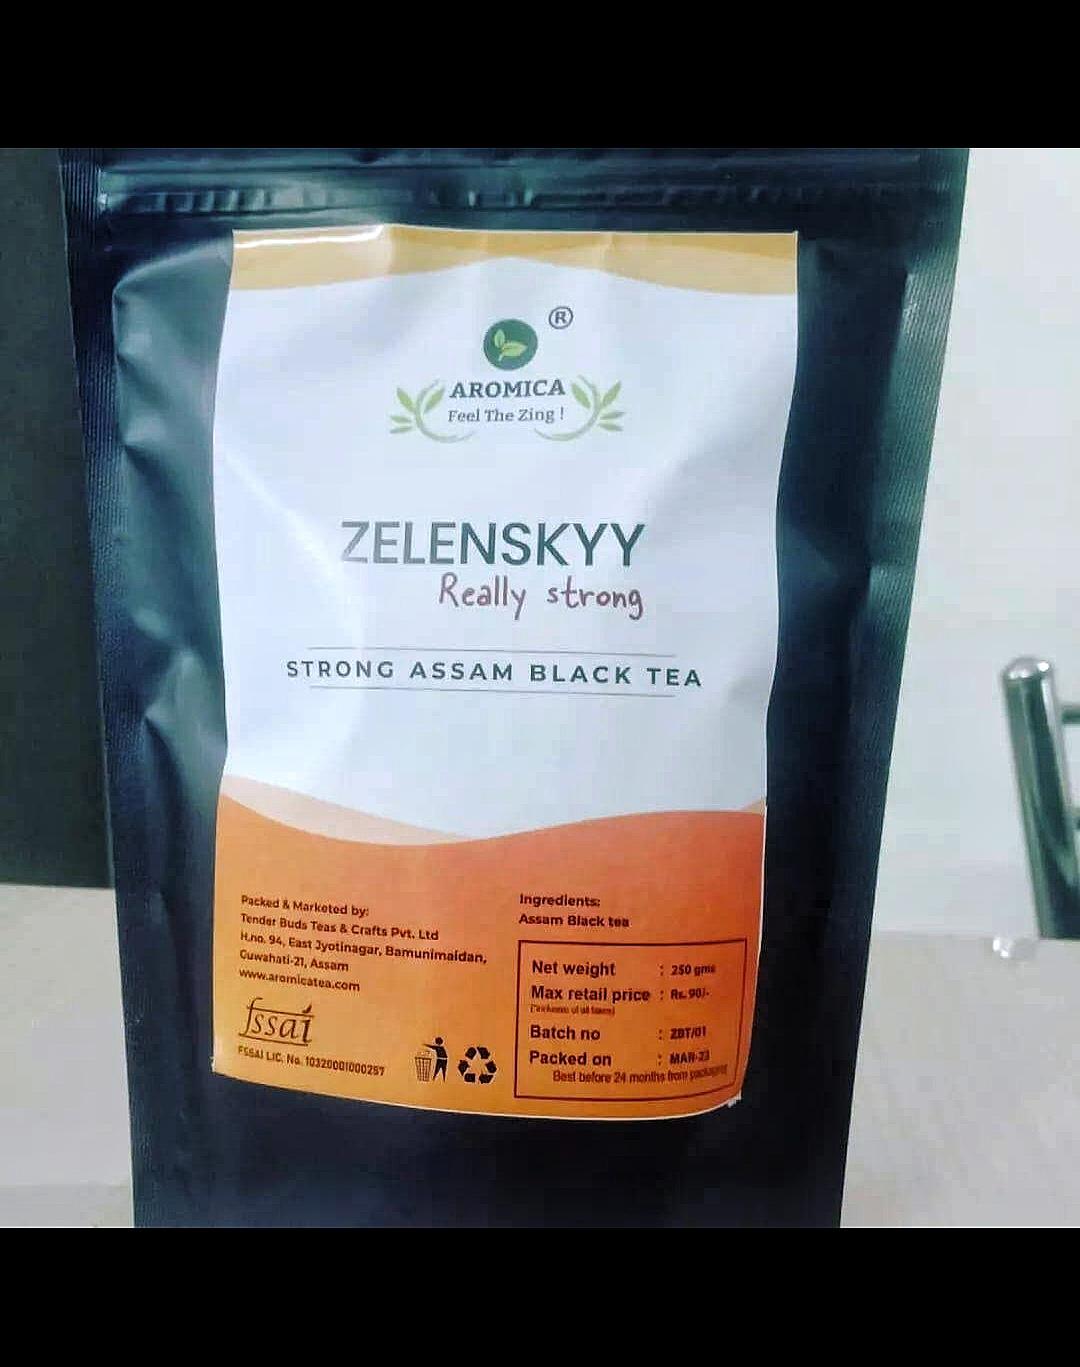 ‘This tea is as strong as Zelenskyy’: A tea company in Assam(India) names its black blend to honour Ukraine’s president.